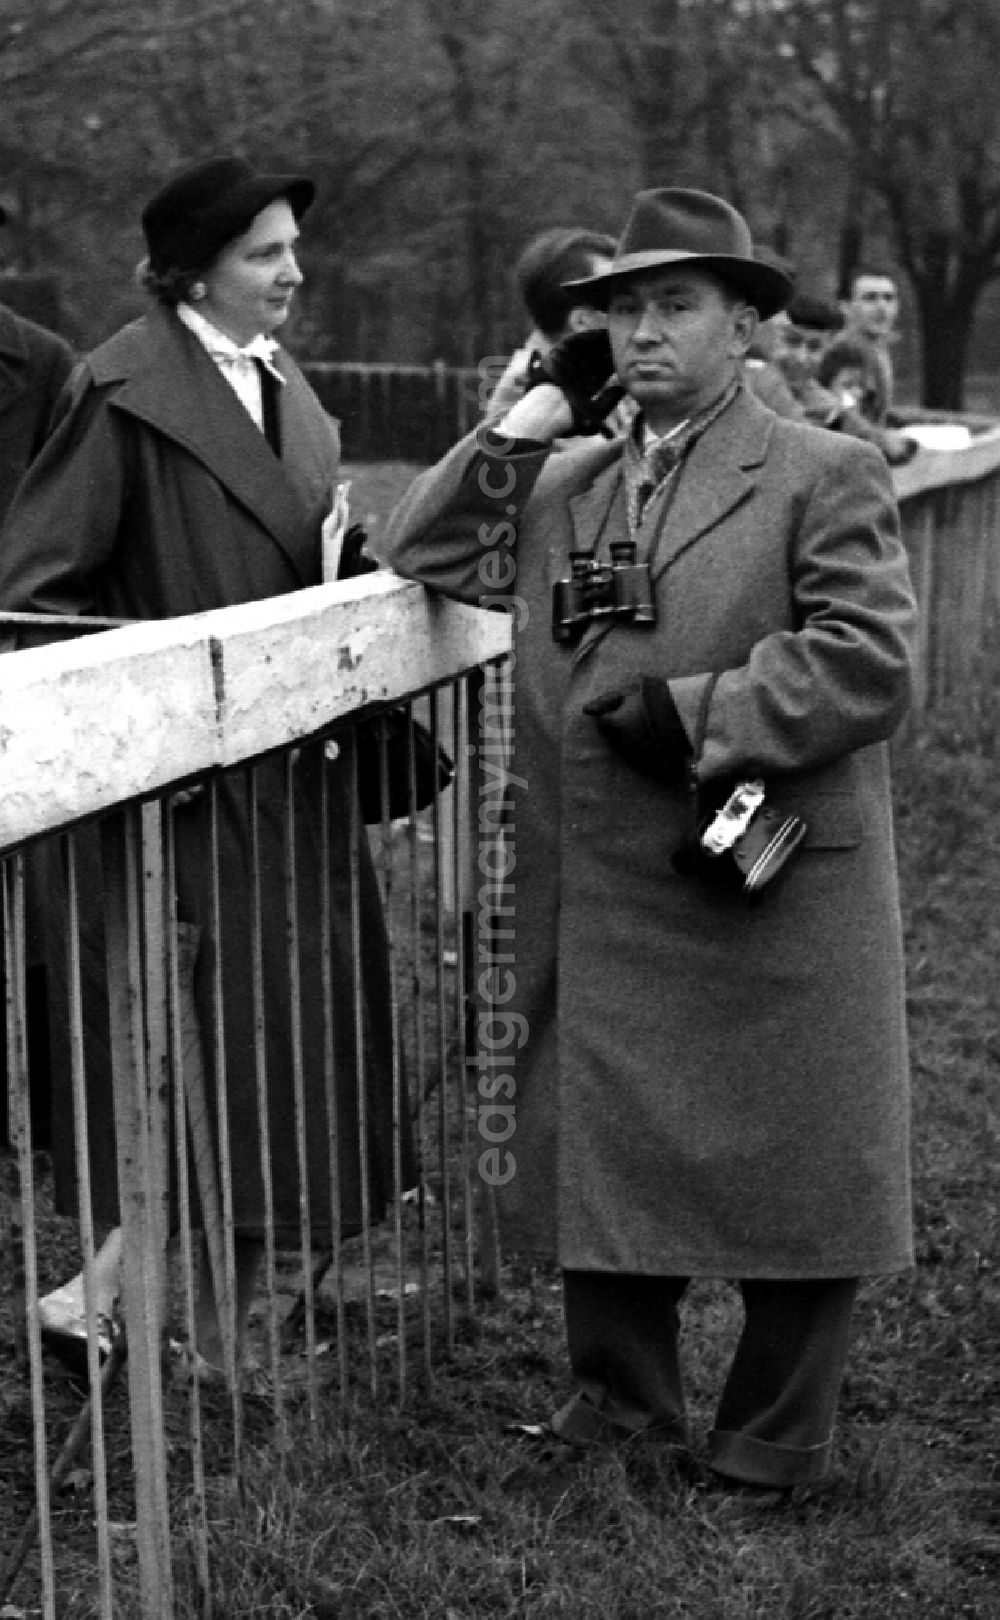 Hoppegarten: Female Photographer Hannelore and Photographer Werner Menzendorf at the Racecourse in Hoppegarten in the state Brandenburg on the territory of the former GDR, German Democratic Republic